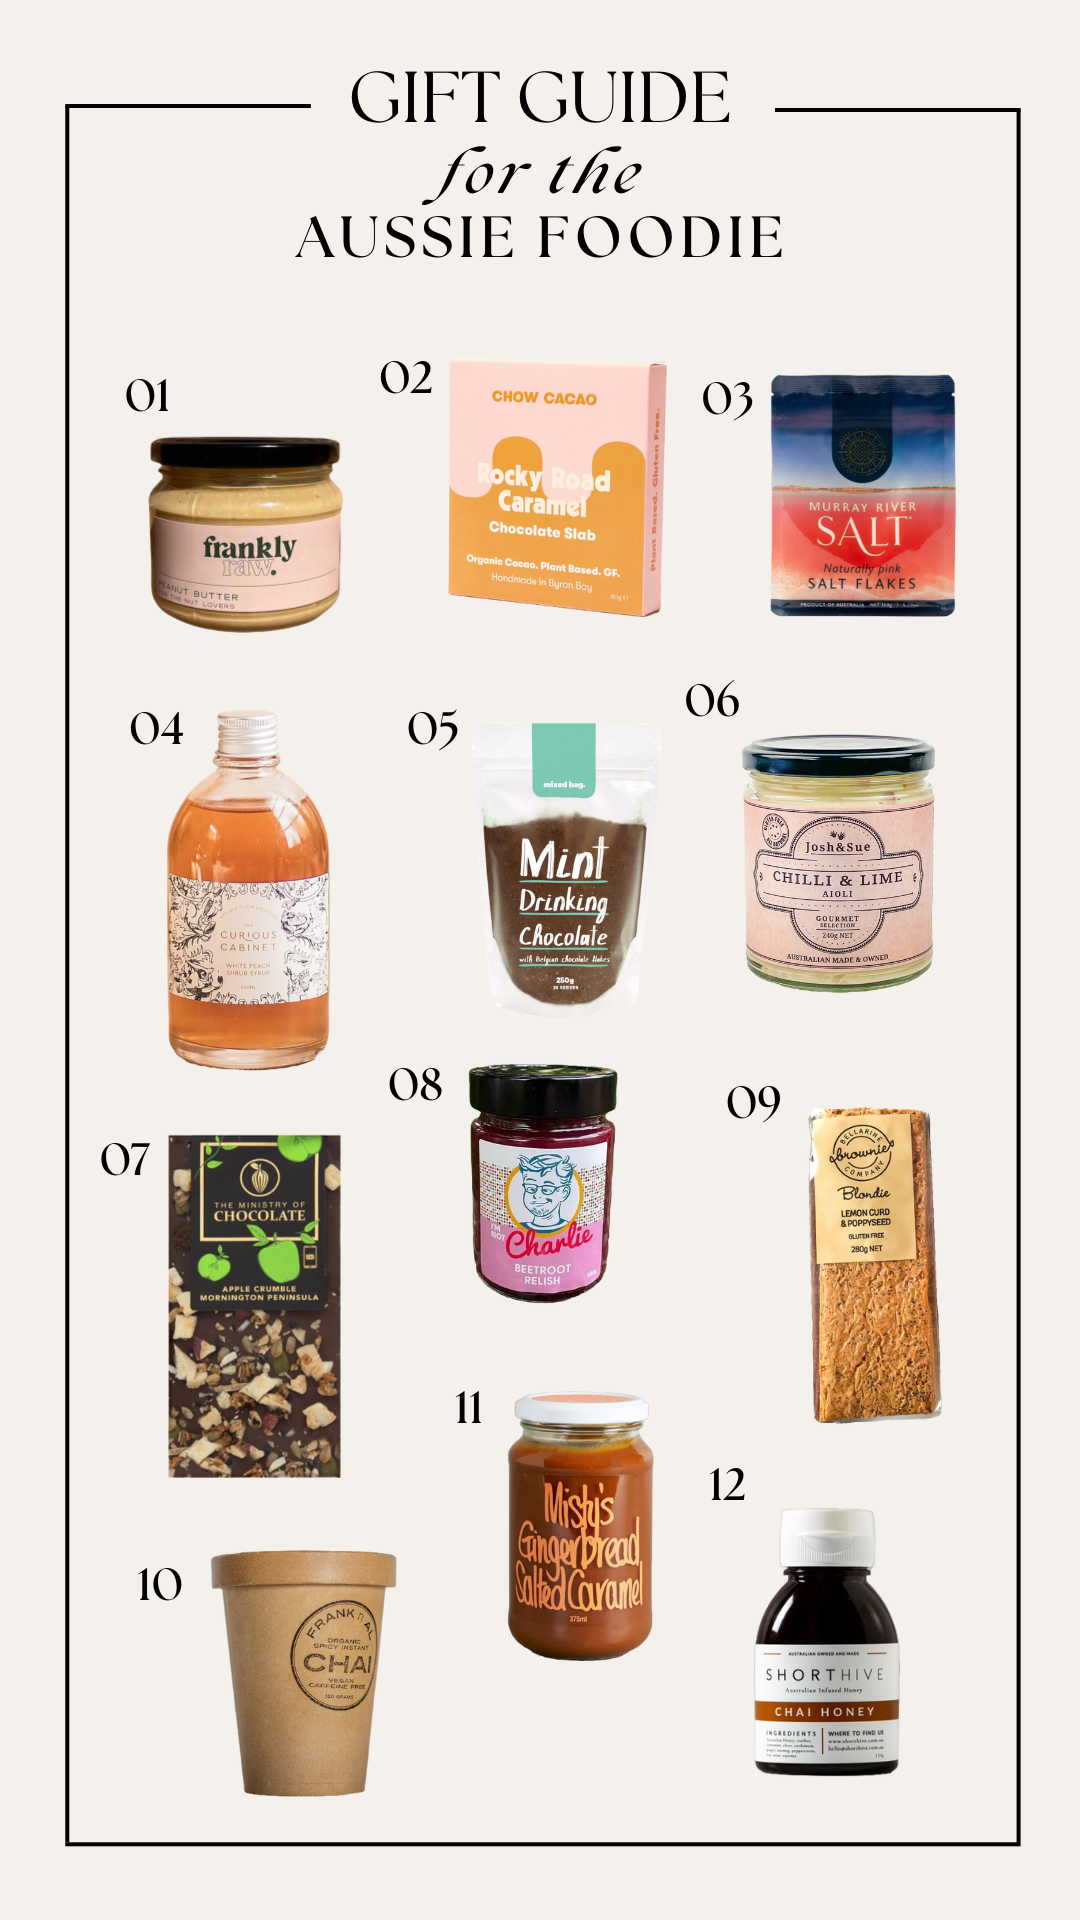 Gift Guide For the Aussie Foodie Stocking Stuffers Secret Santa Local Food Shop Small Honey Christmas Gift Ideas